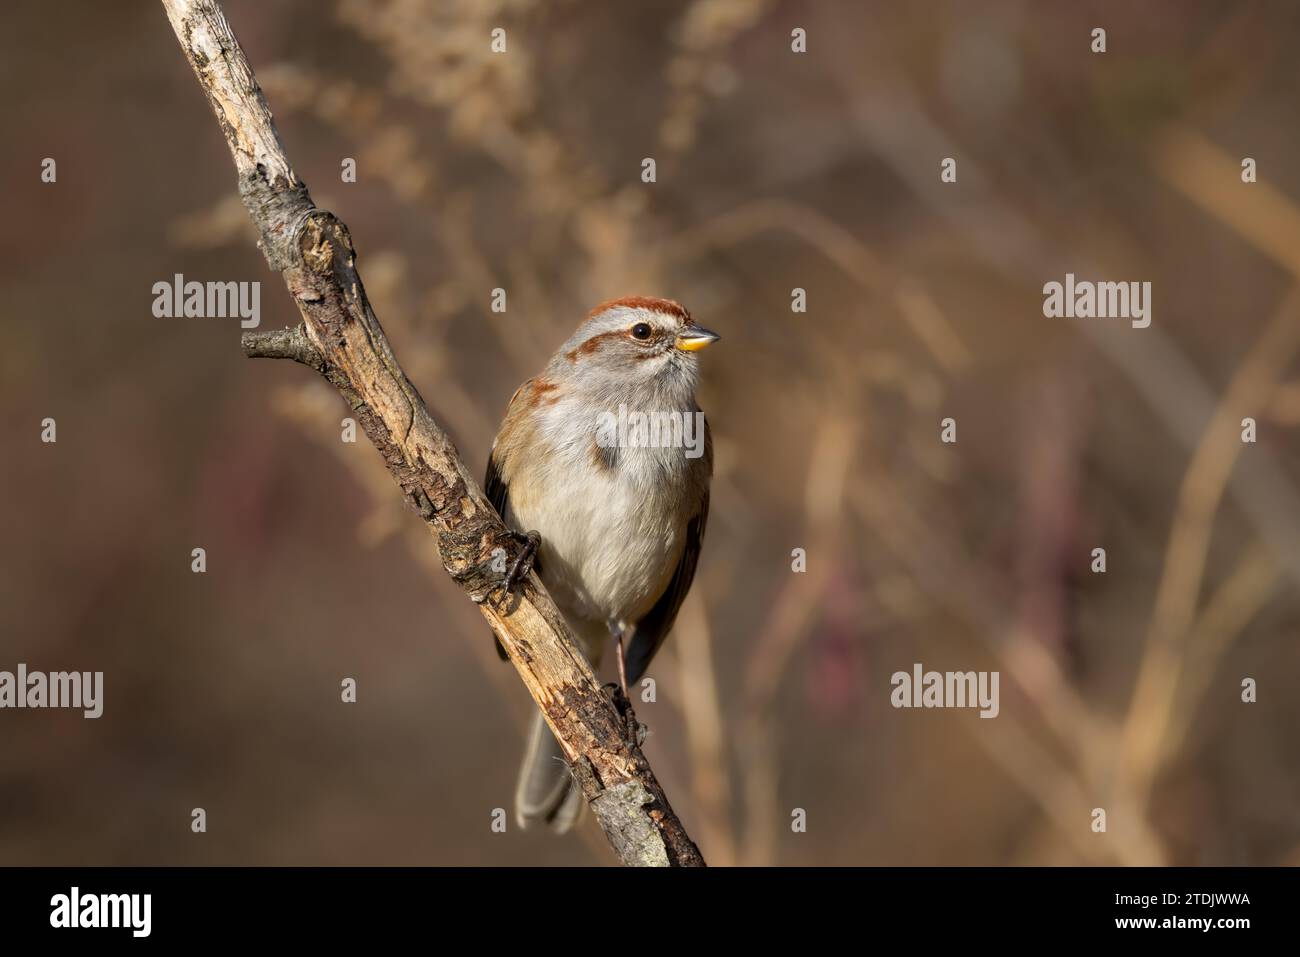 American tree sparrow is a small bird that frequents feeders Stock Photo